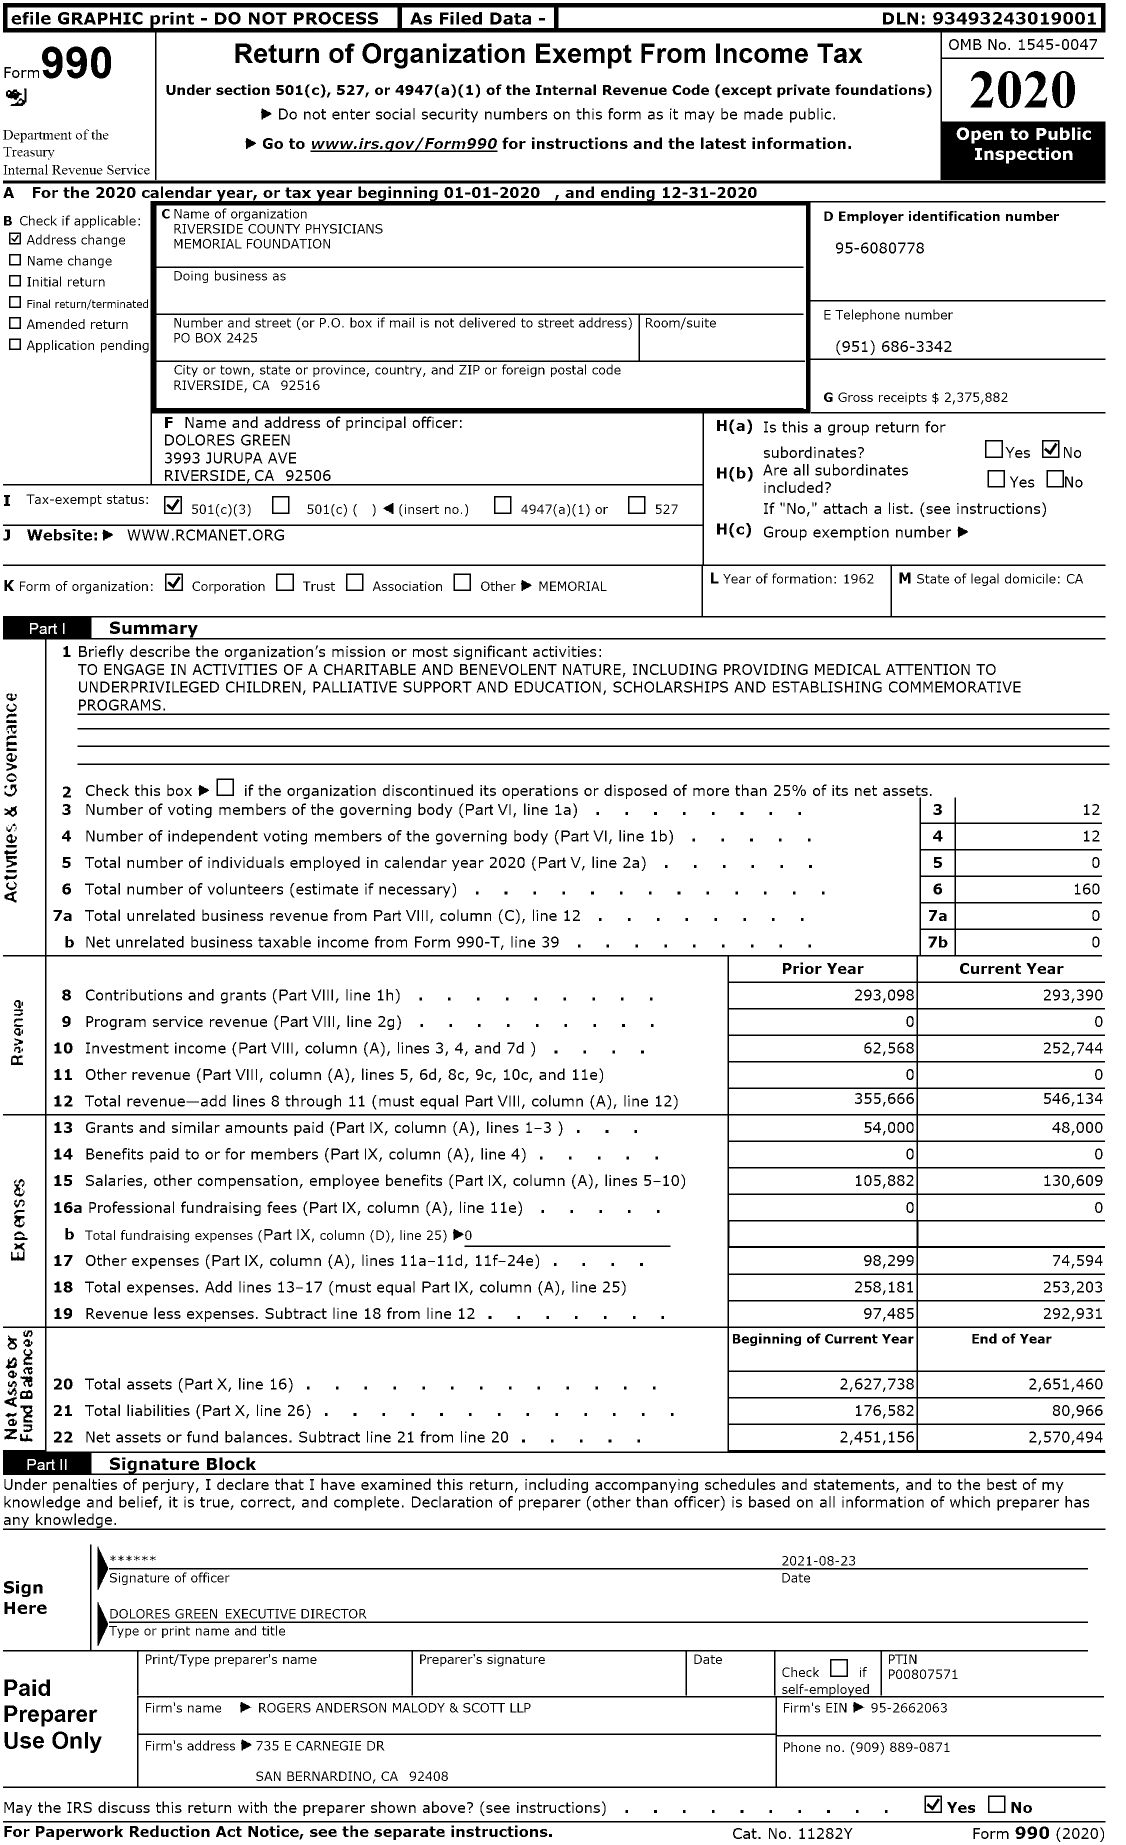 Image of first page of 2020 Form 990 for Riverside County Physicians Memorial Foundation